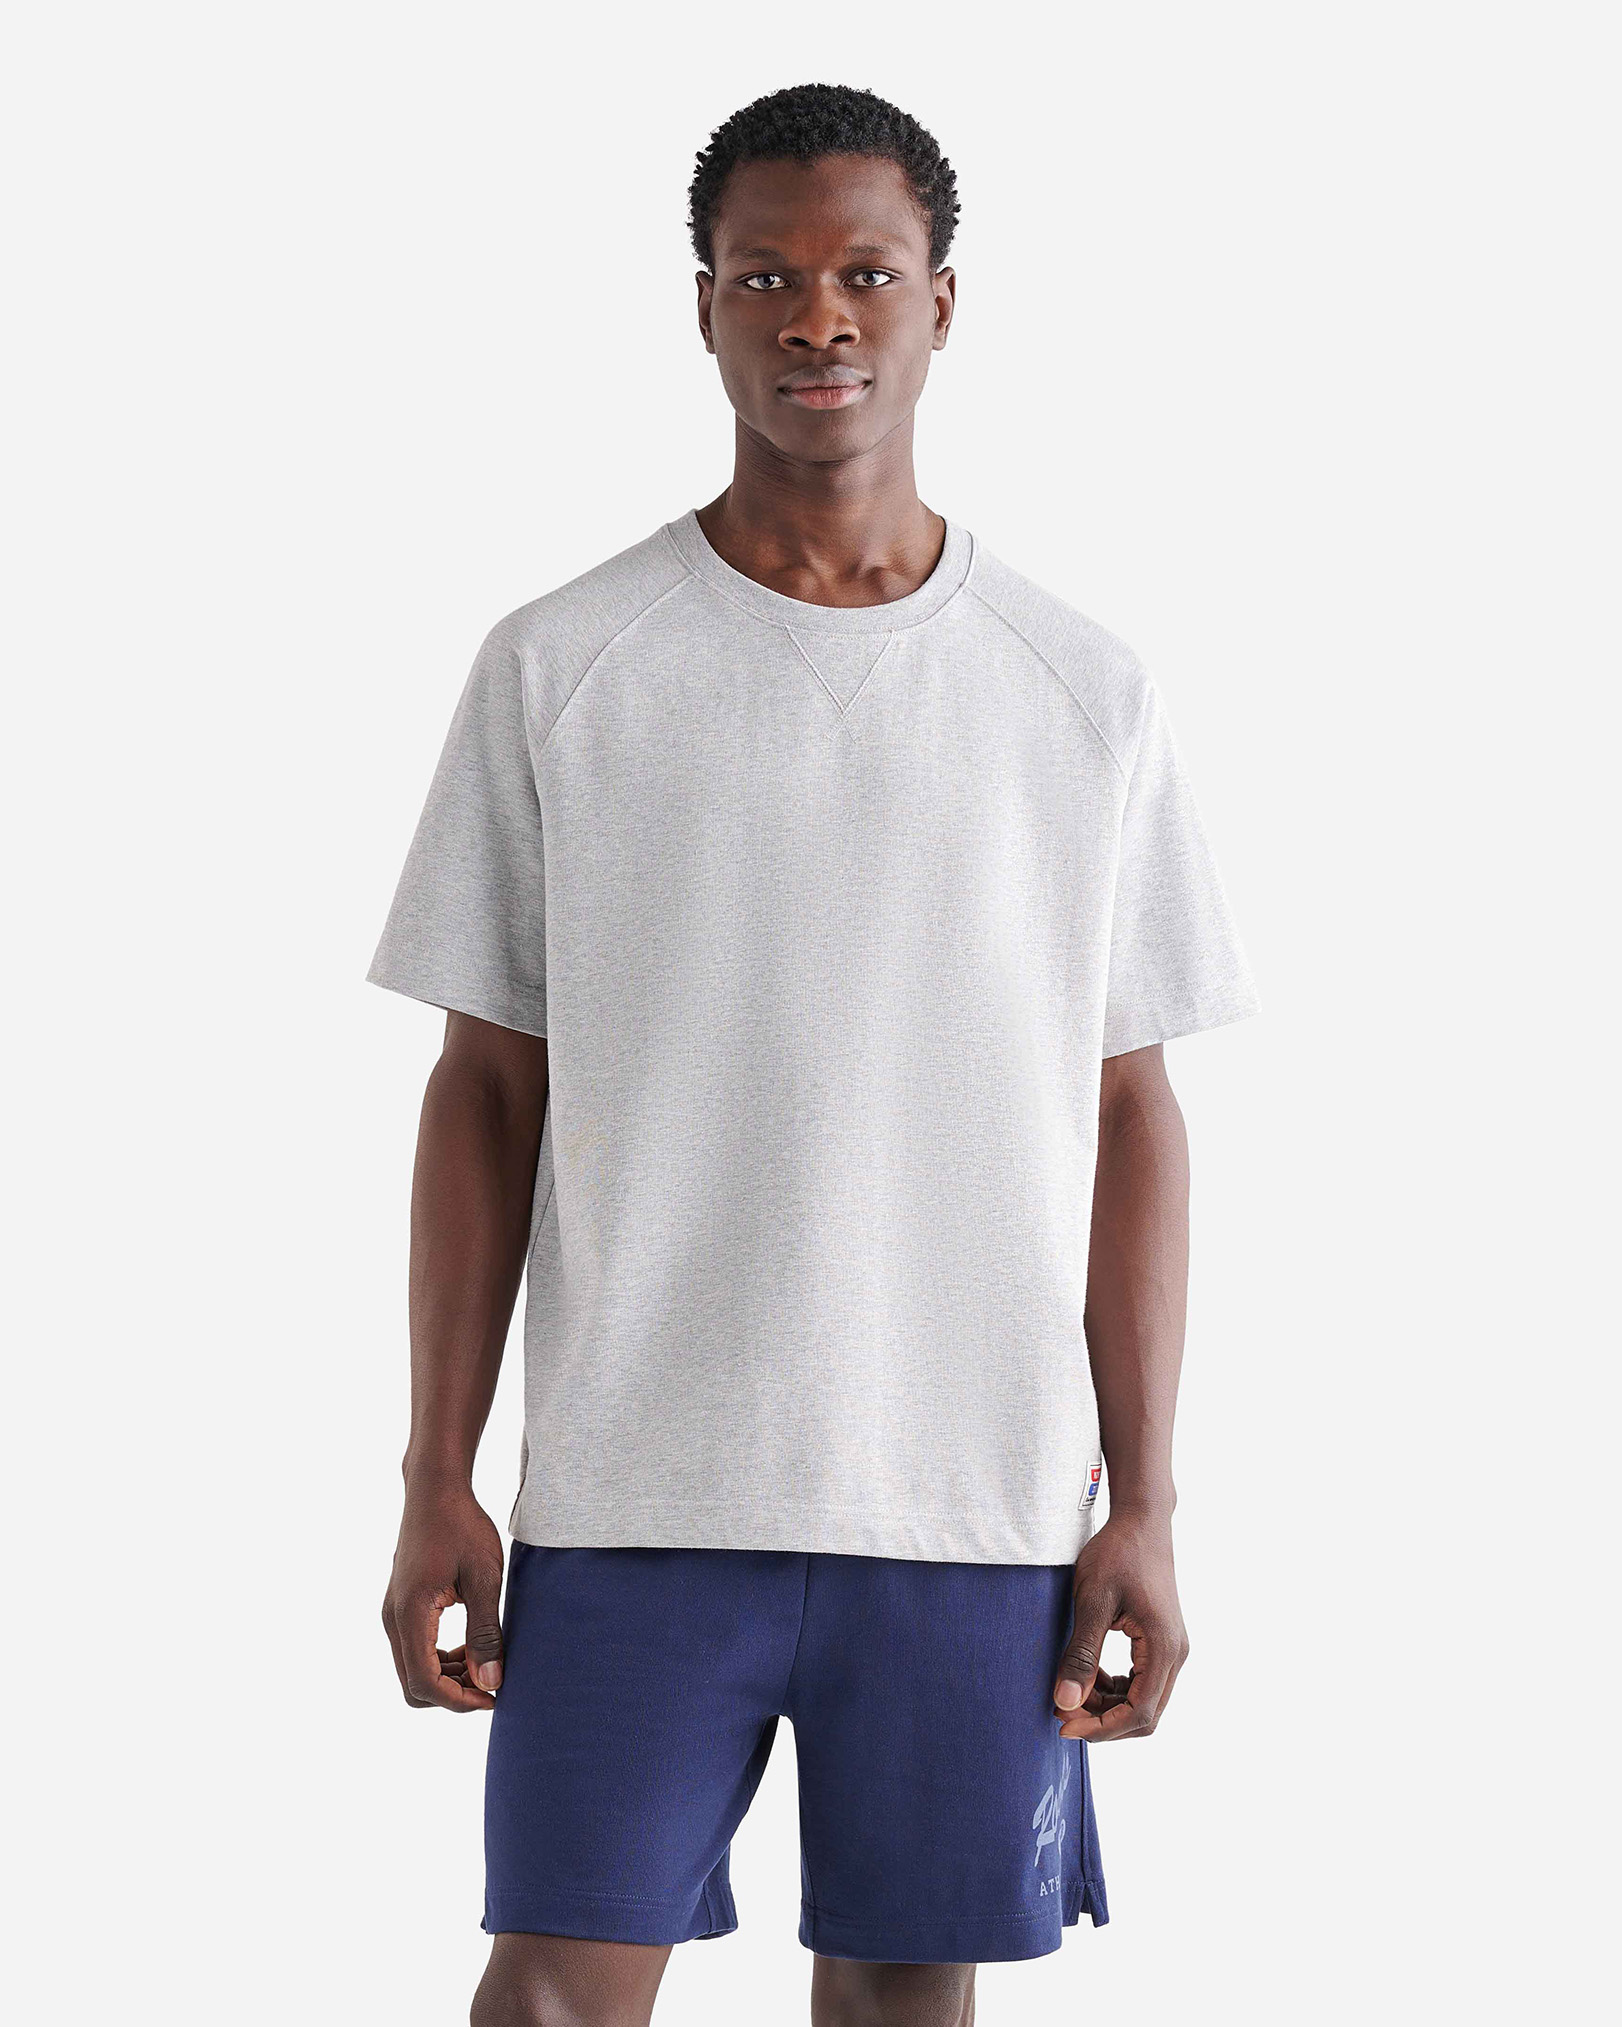 Roots Warm-Up Jersey Short Sleeve T-Shirt in Heather Grey